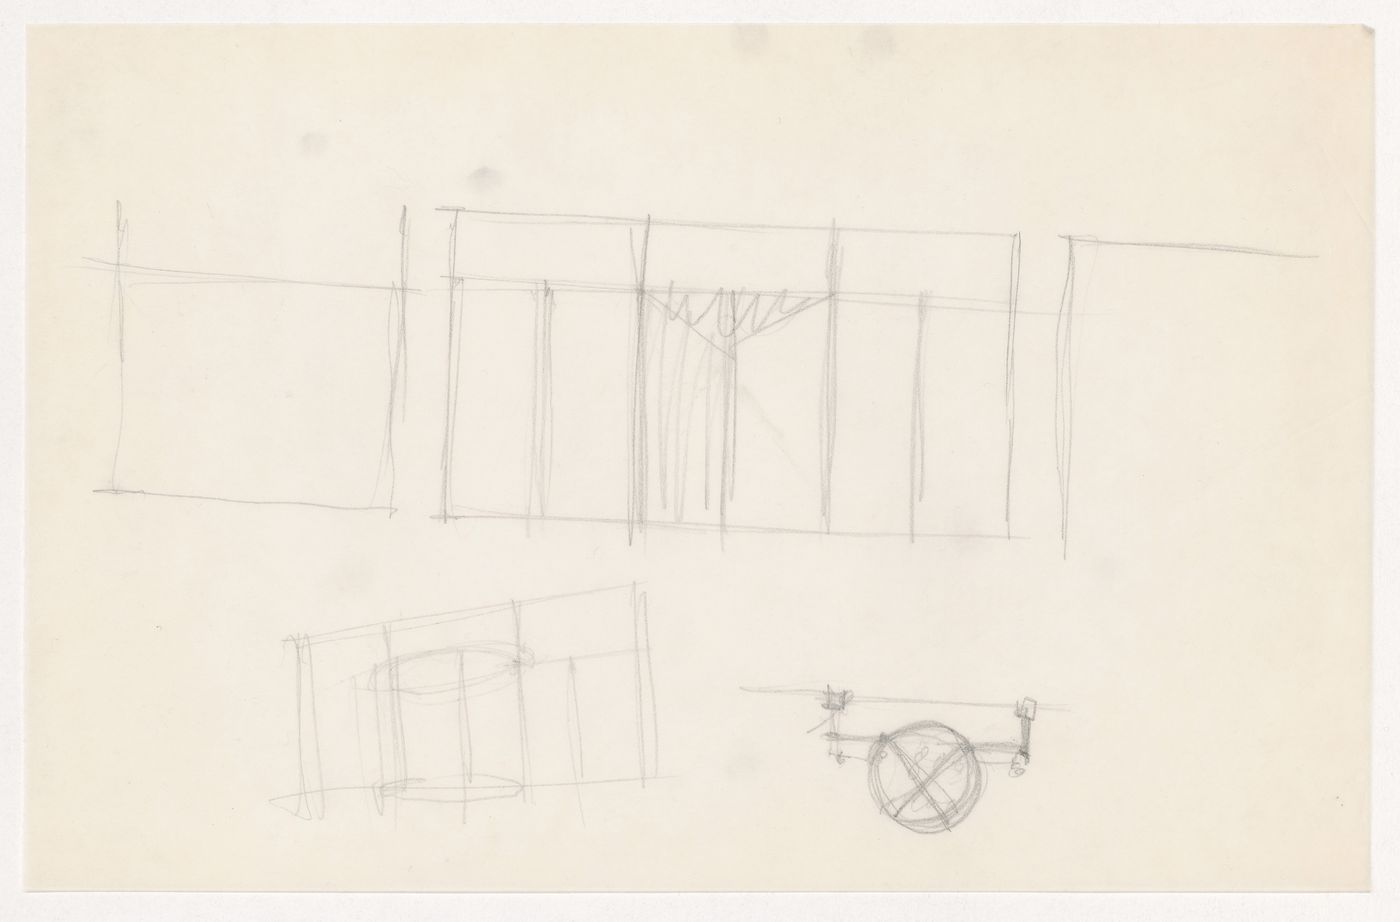 Sketch elevation for entrance, and perspective sketch and sketch plan for revolving door for the Metallurgy Building, Illinois Institute of Technology, Chicago